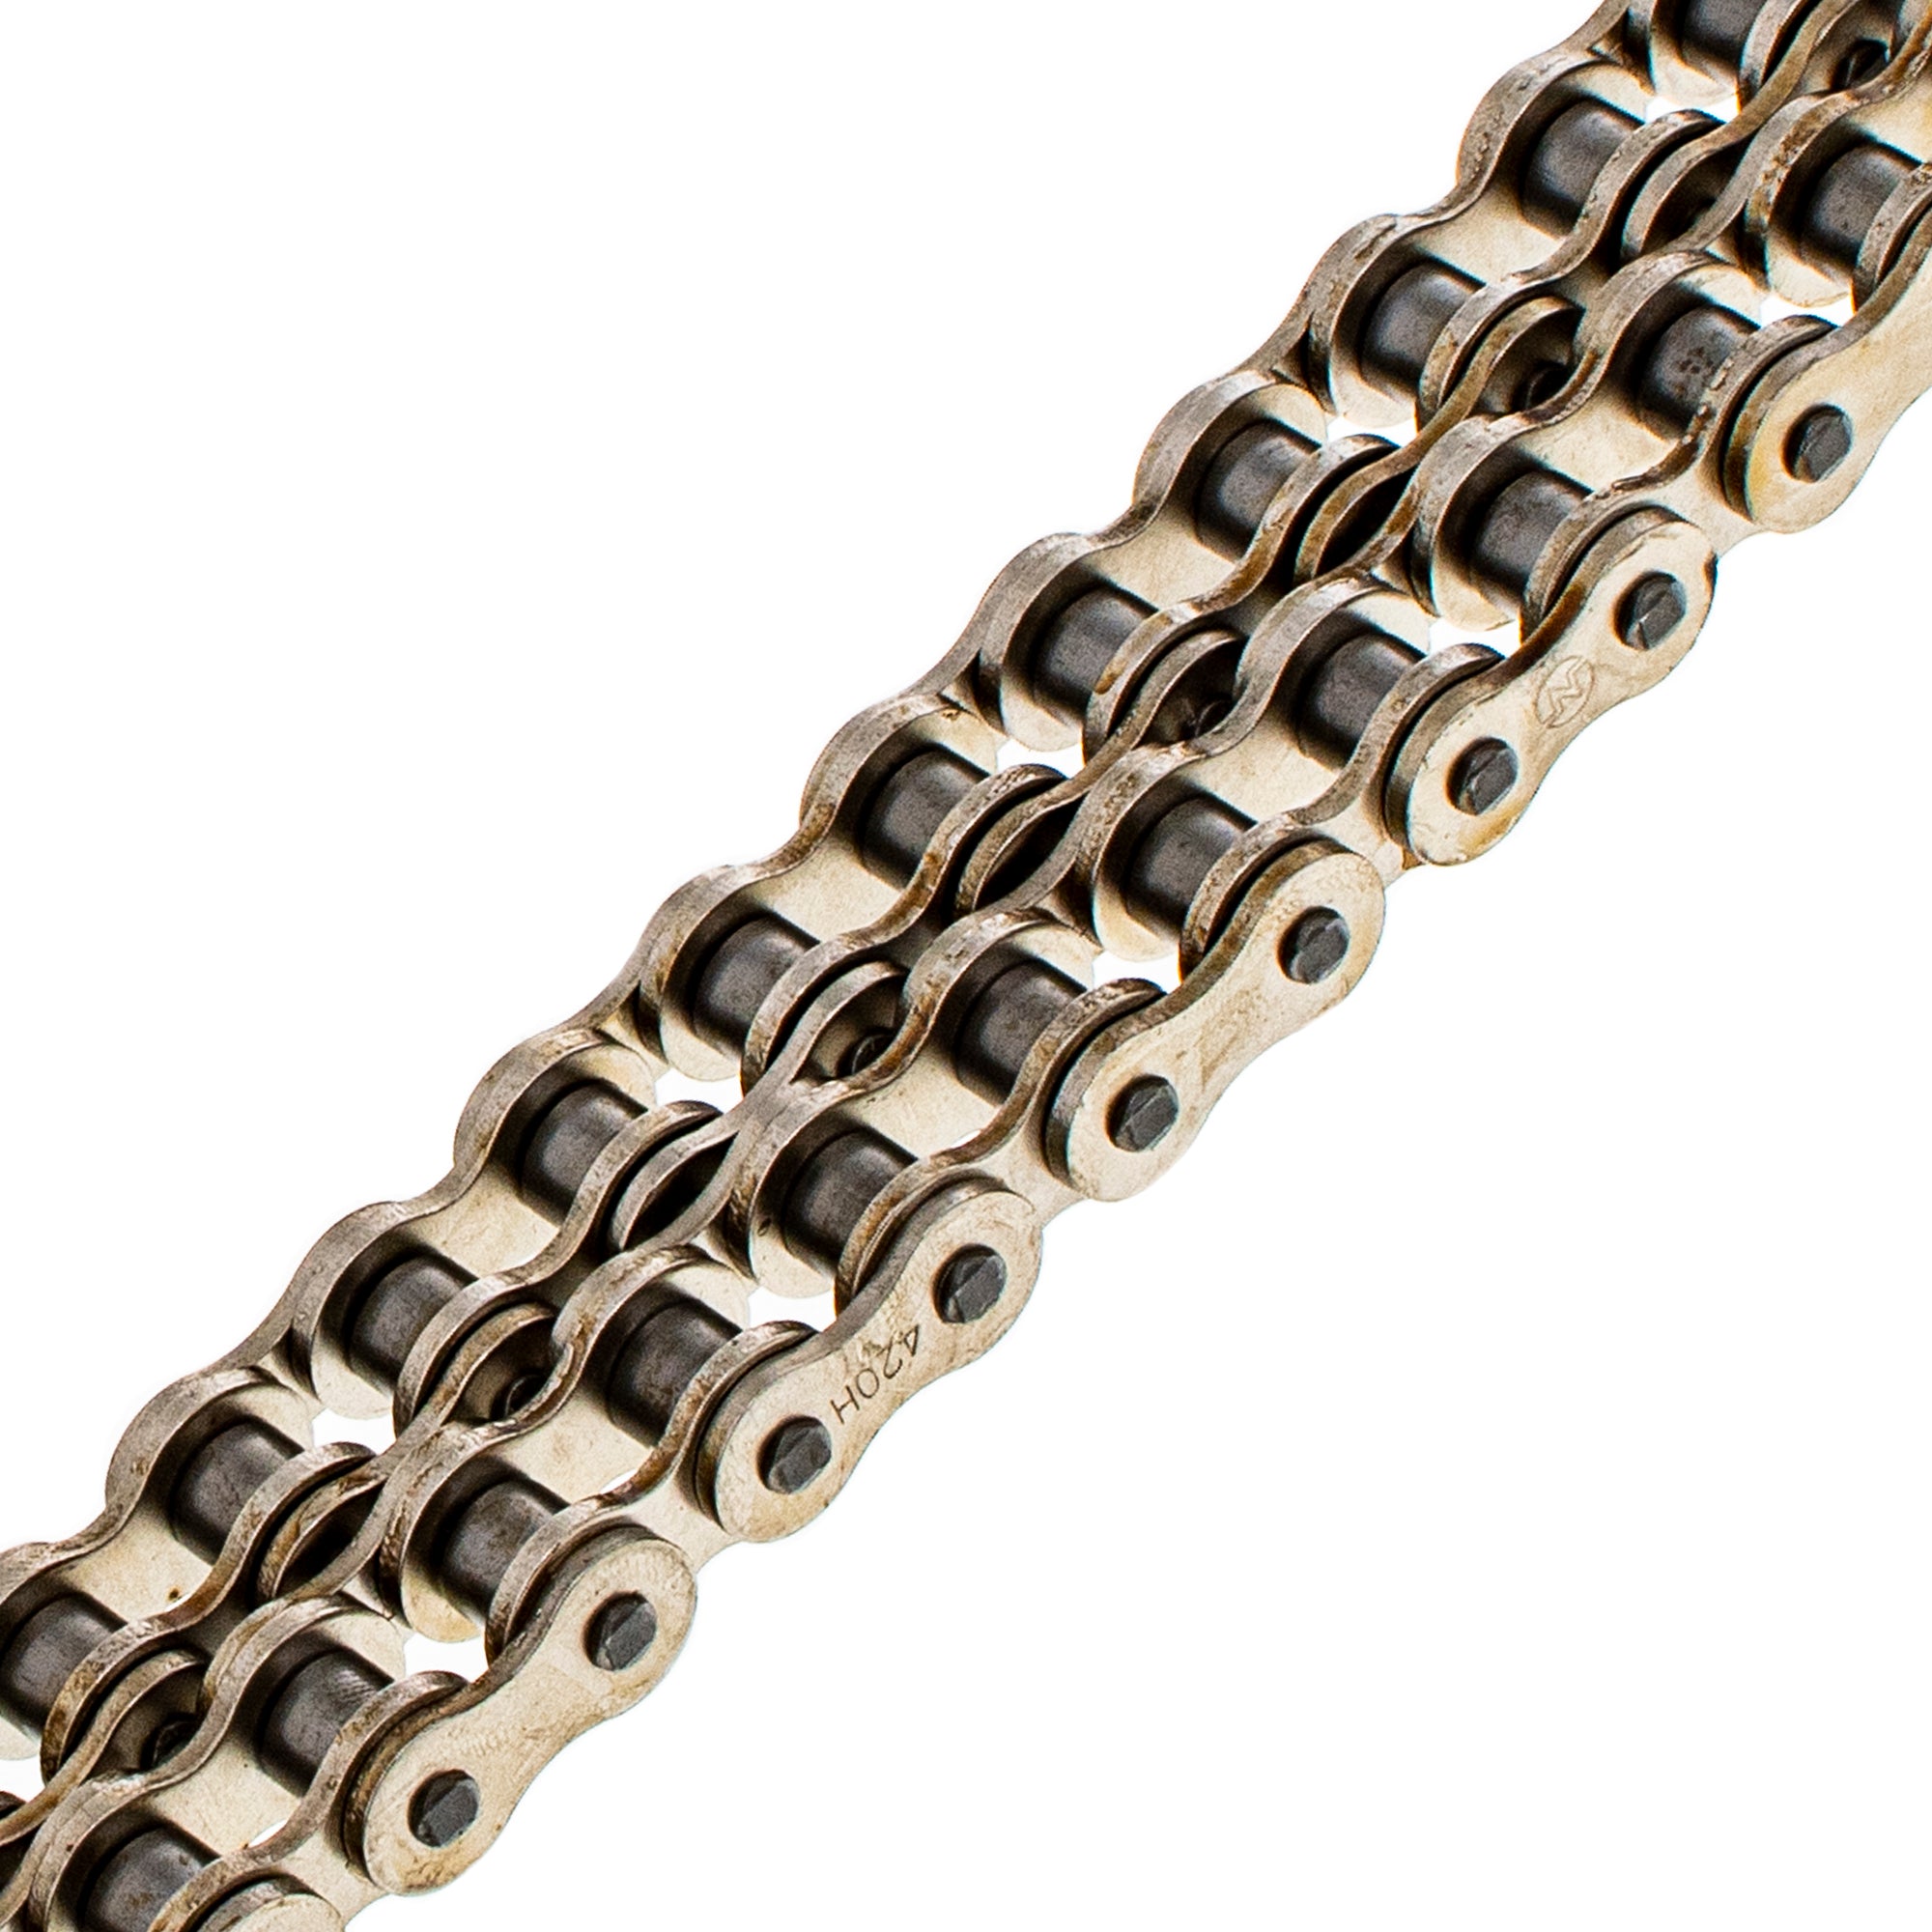 Drive Chain 132 Standard Non O-Ring w/ Master Link for MTD Cub Cadet Troy-Bilt RS50 5245 NICHE 519-CDC2356H